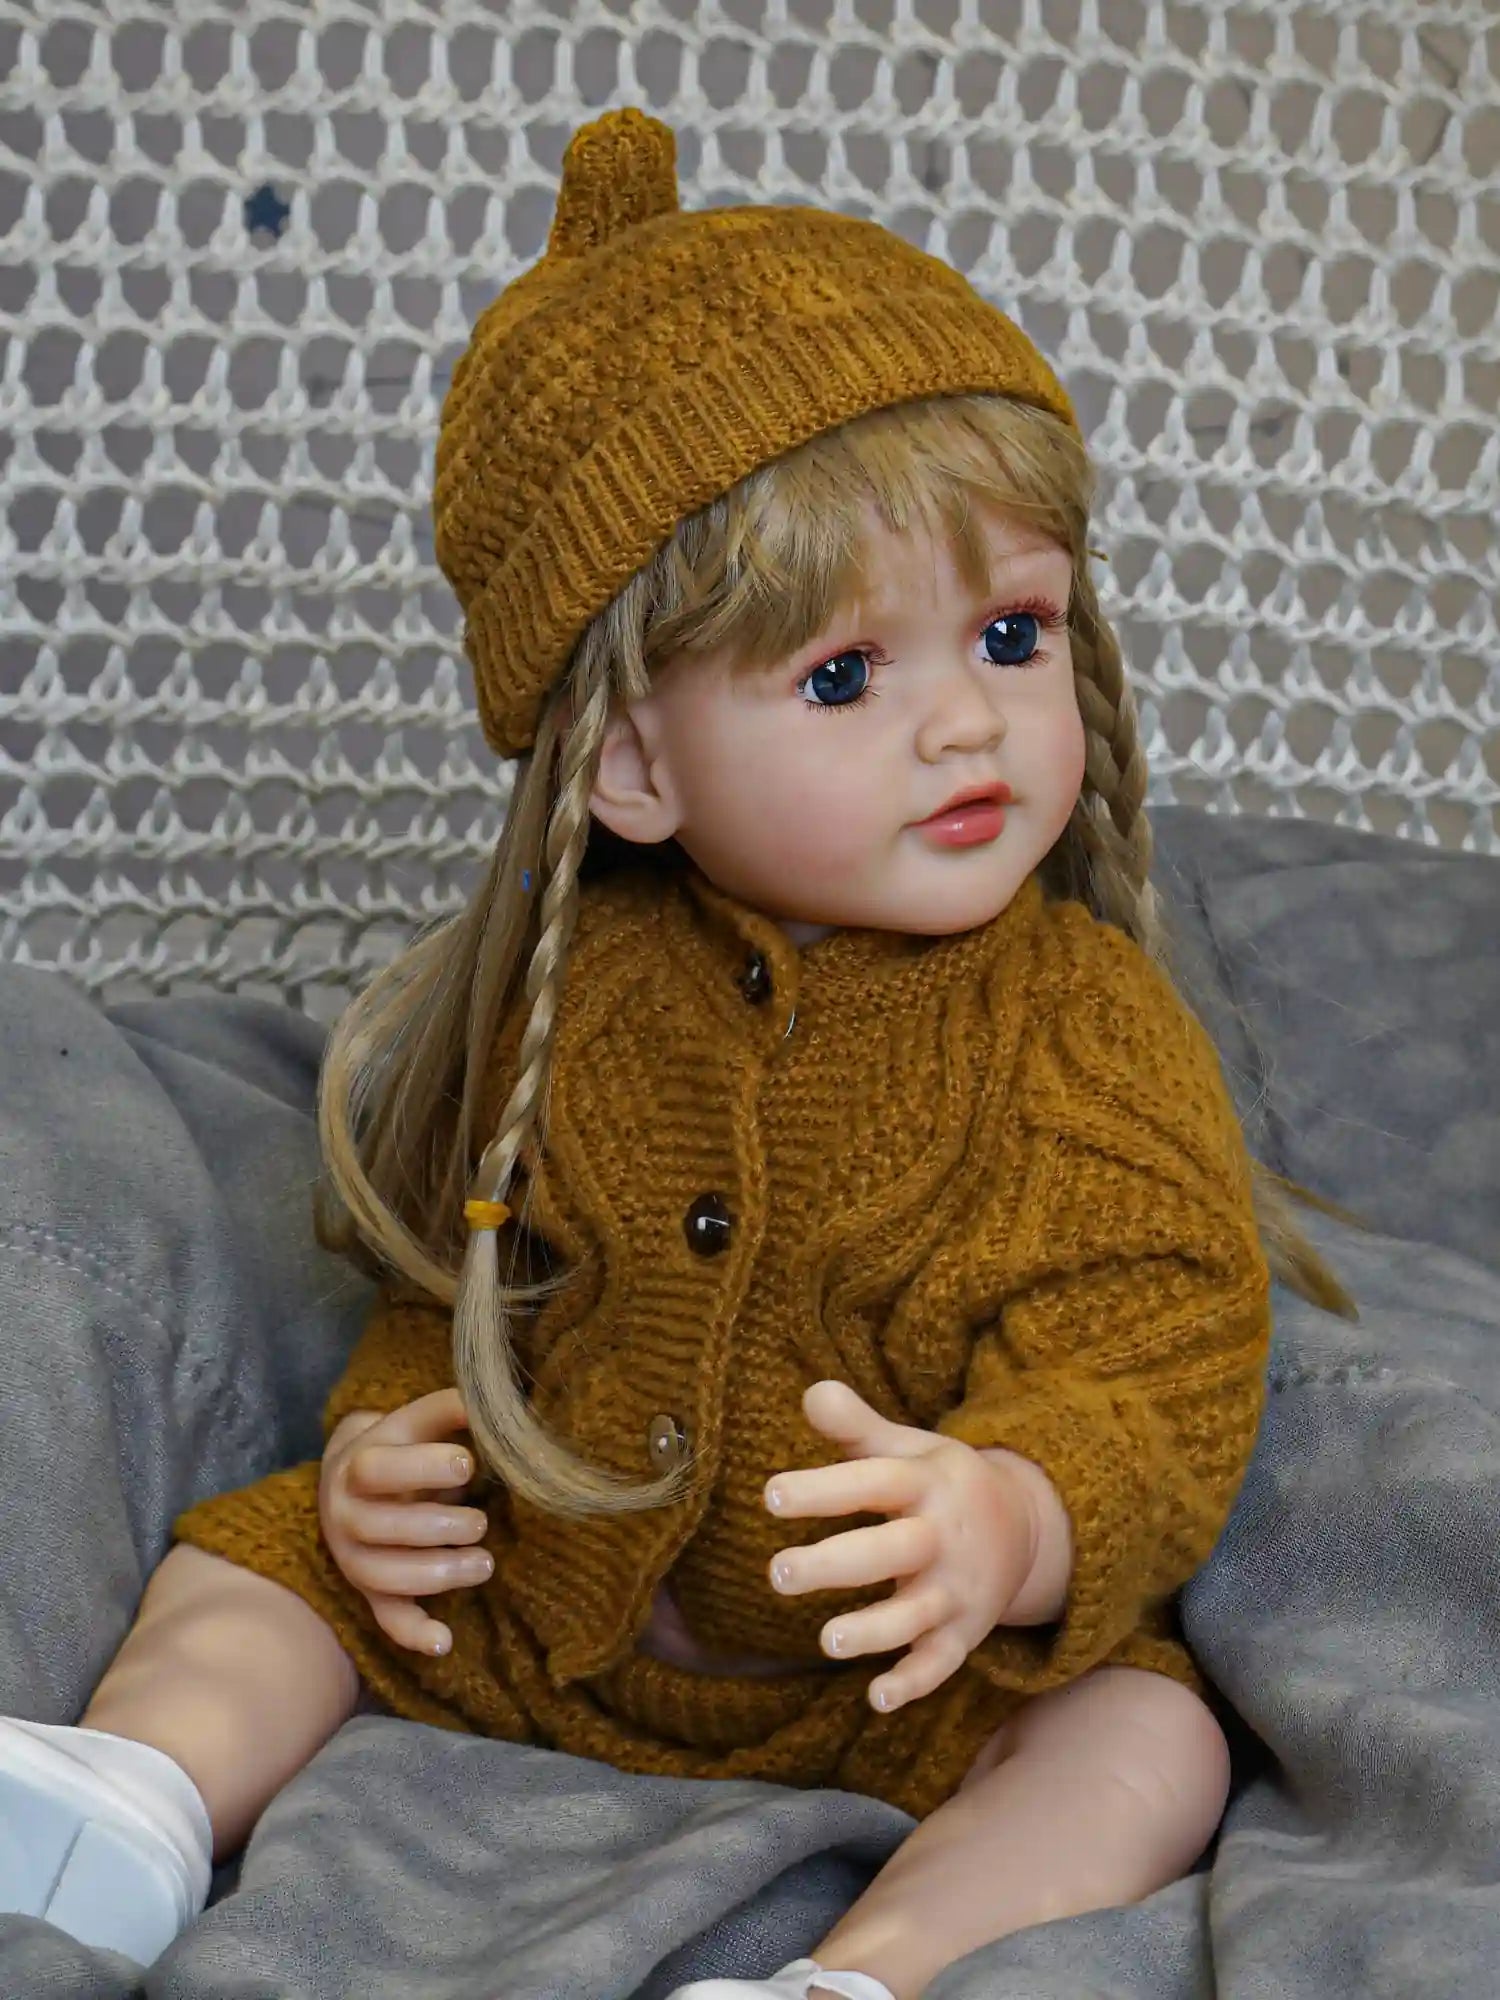 Let this reborn doll, with her oceanic blue eyes and comfortable green ensemble, be your little one's companion through adventures real and imagined.